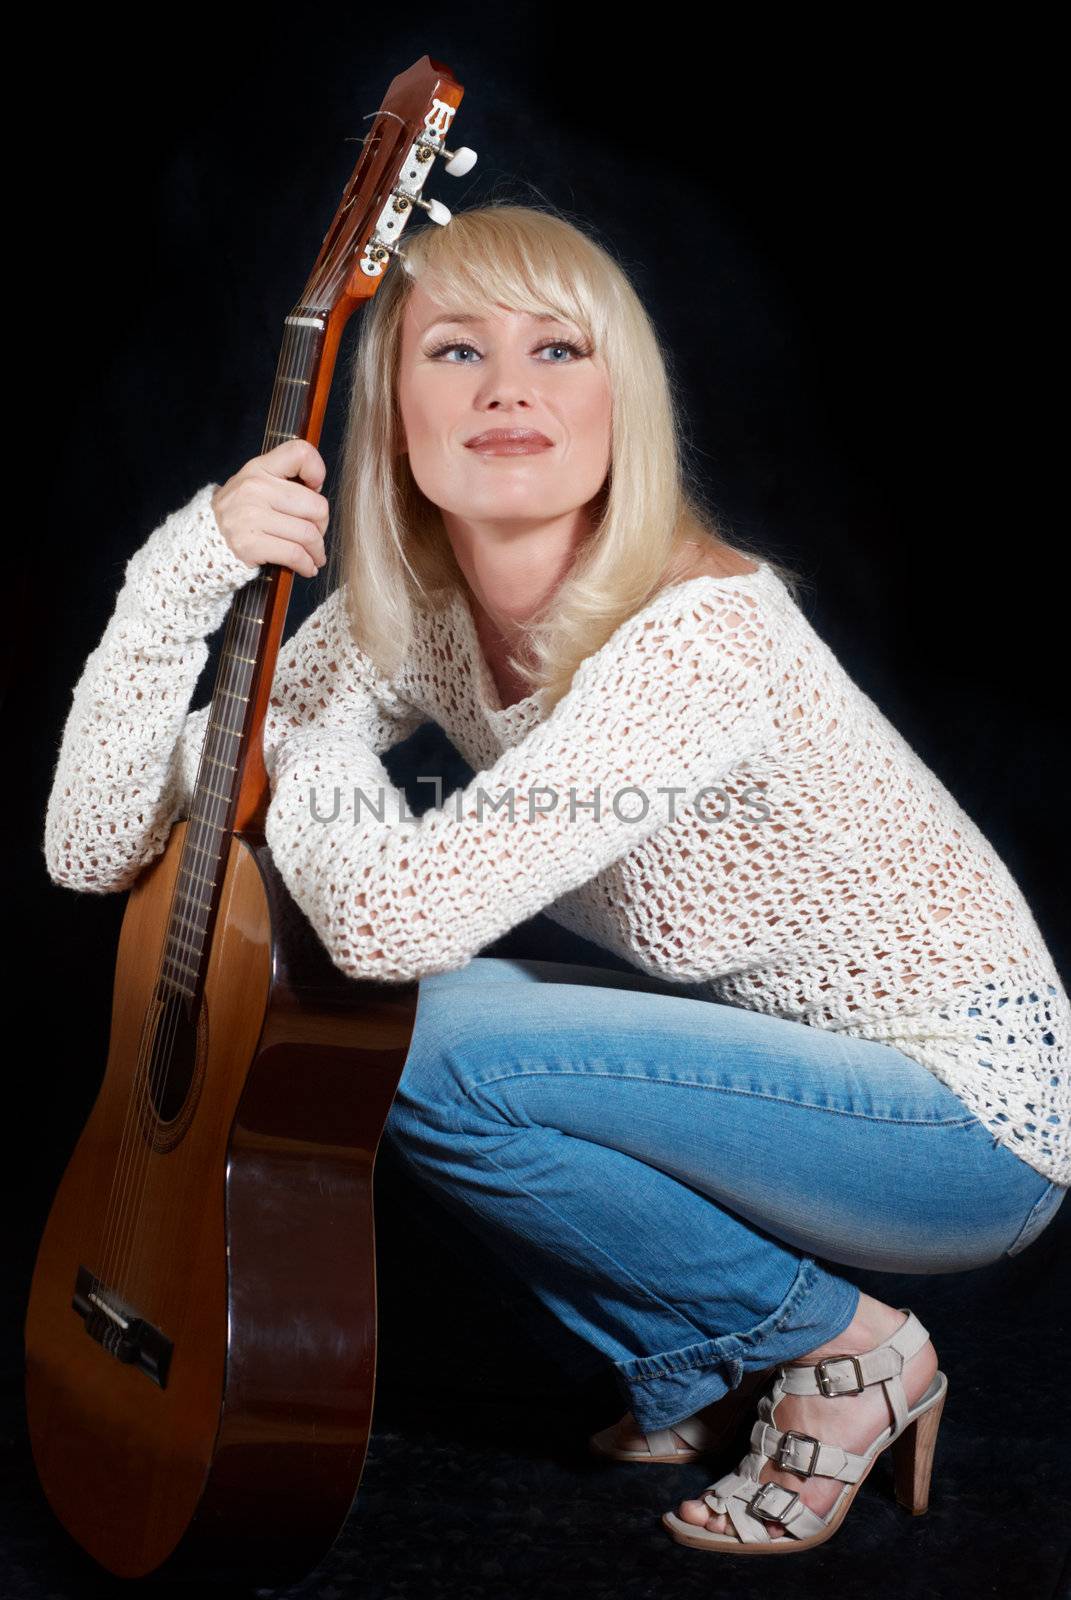 blonde women and guitar by Anpet2000